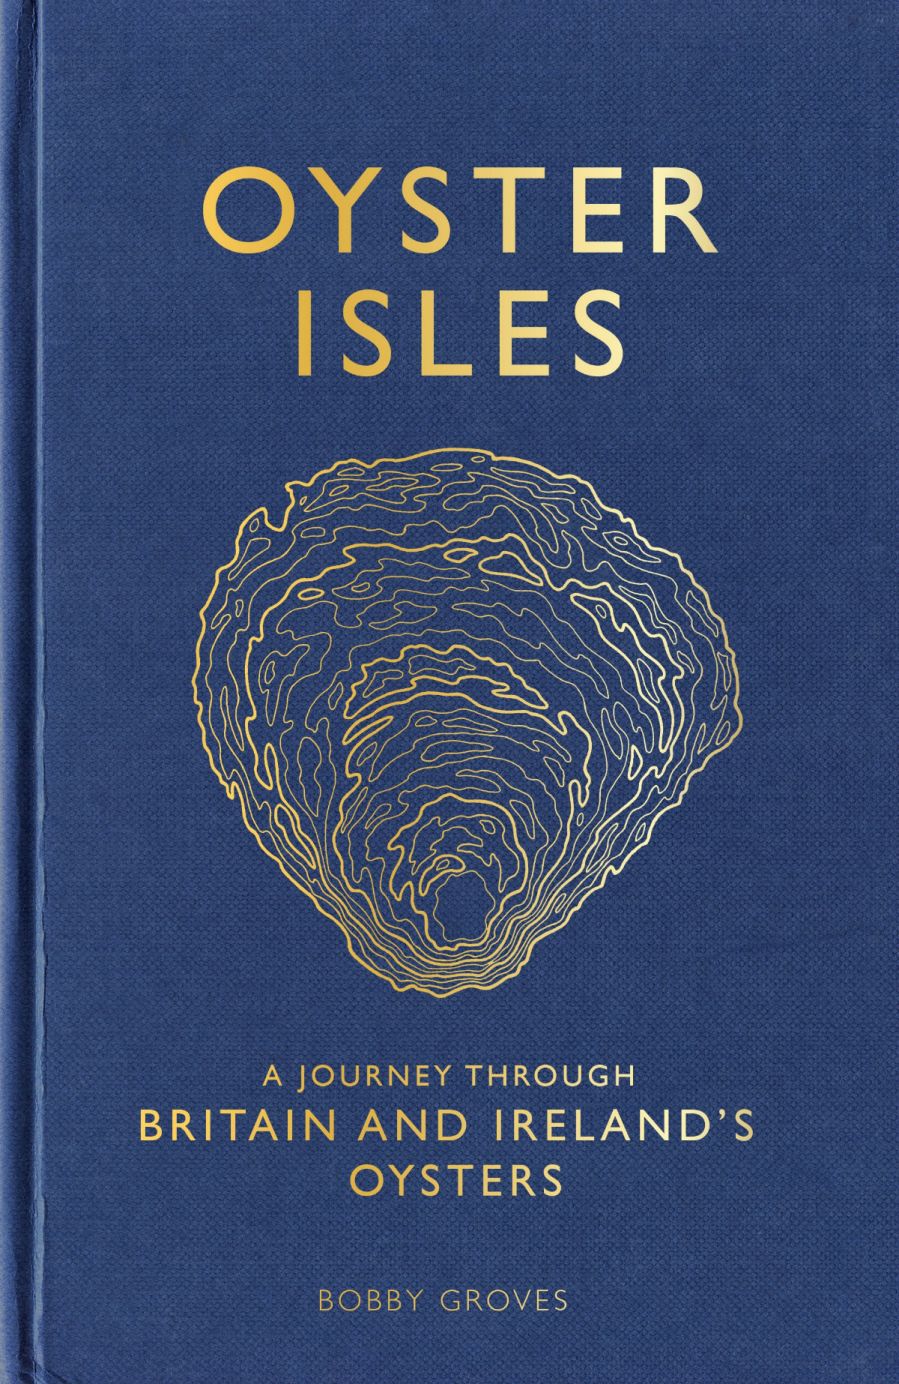 book cover of Oyster Isles, by Bobby Groves.